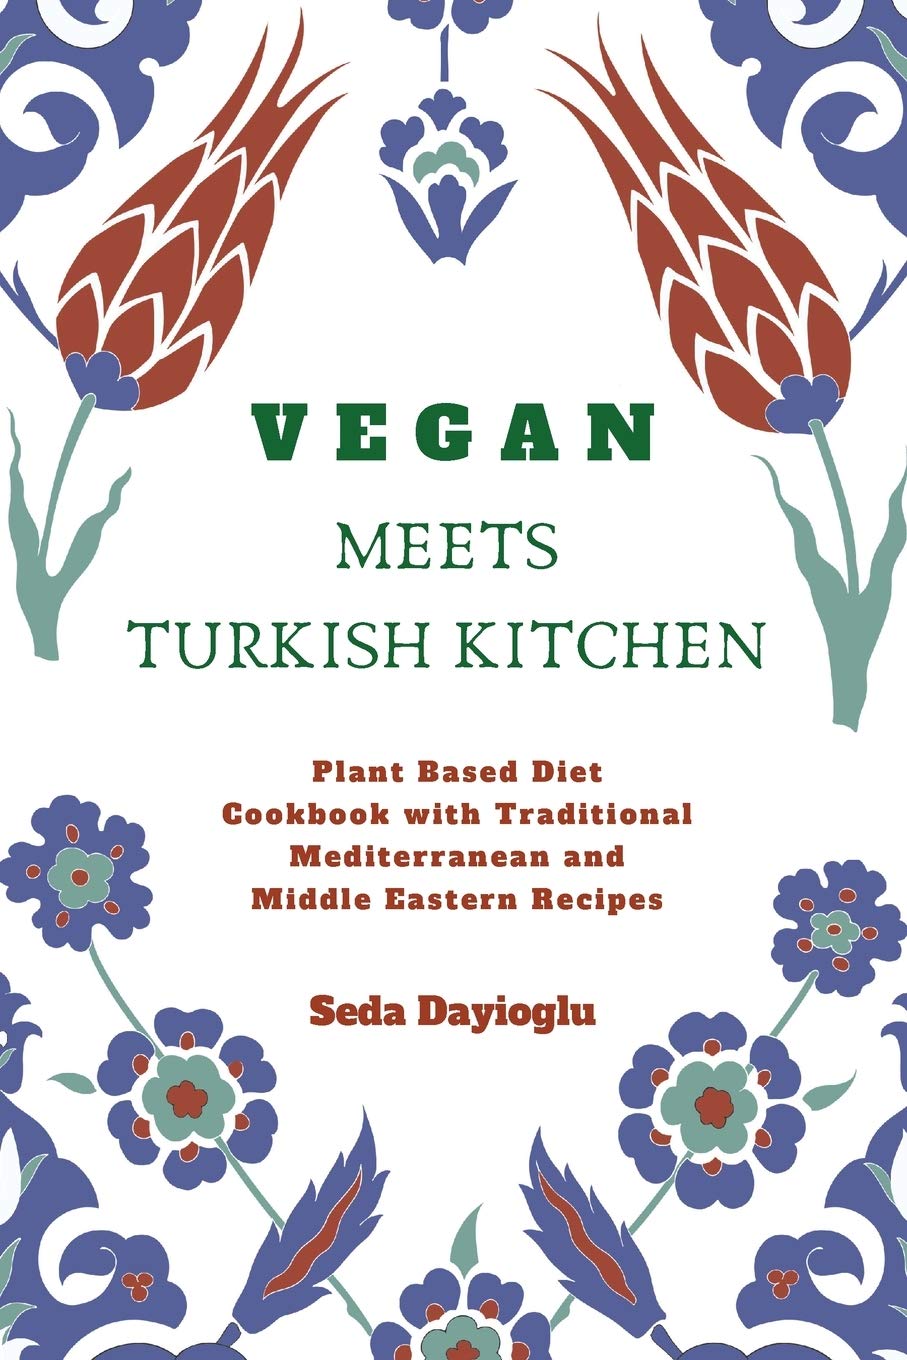 Vegan Meets Turkish Kitchen: Plant Based Diet Cookbook with Traditional Mediterranean and Middle Eastern Recipes (Seda Dayioglu)